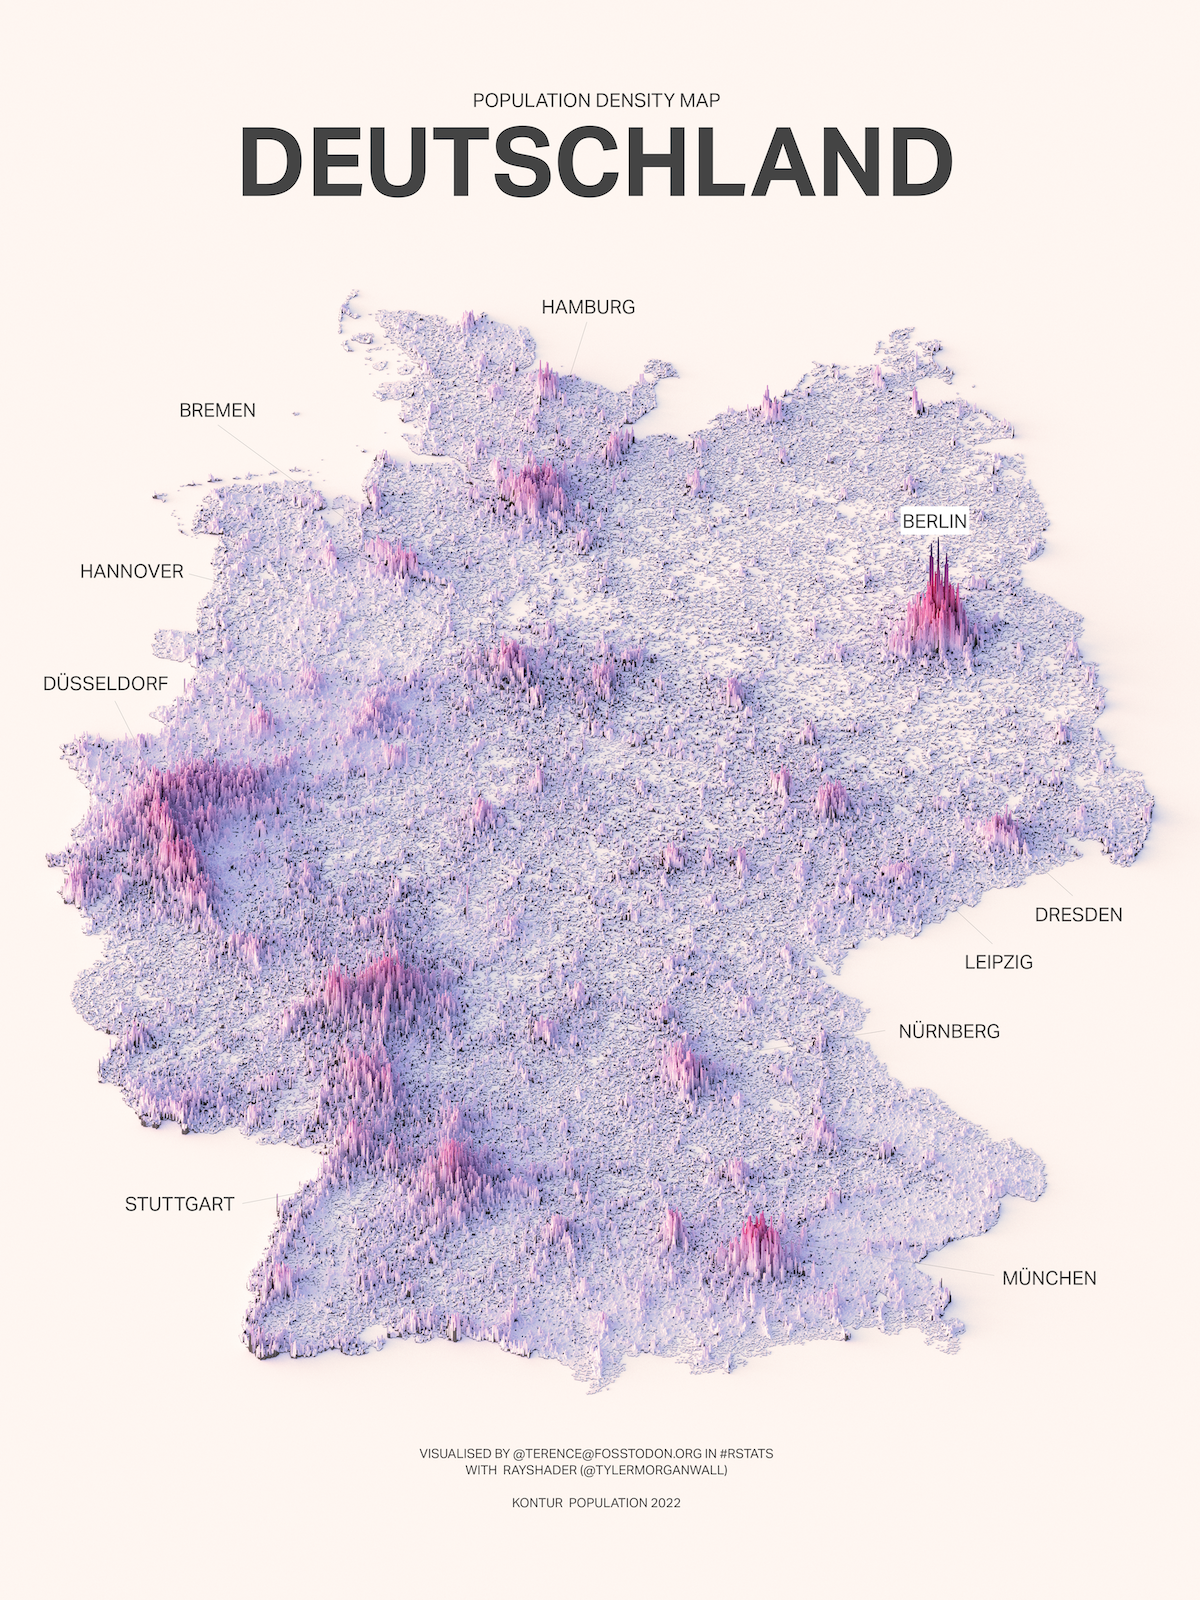 This image shows a map of Germany and its population spread.